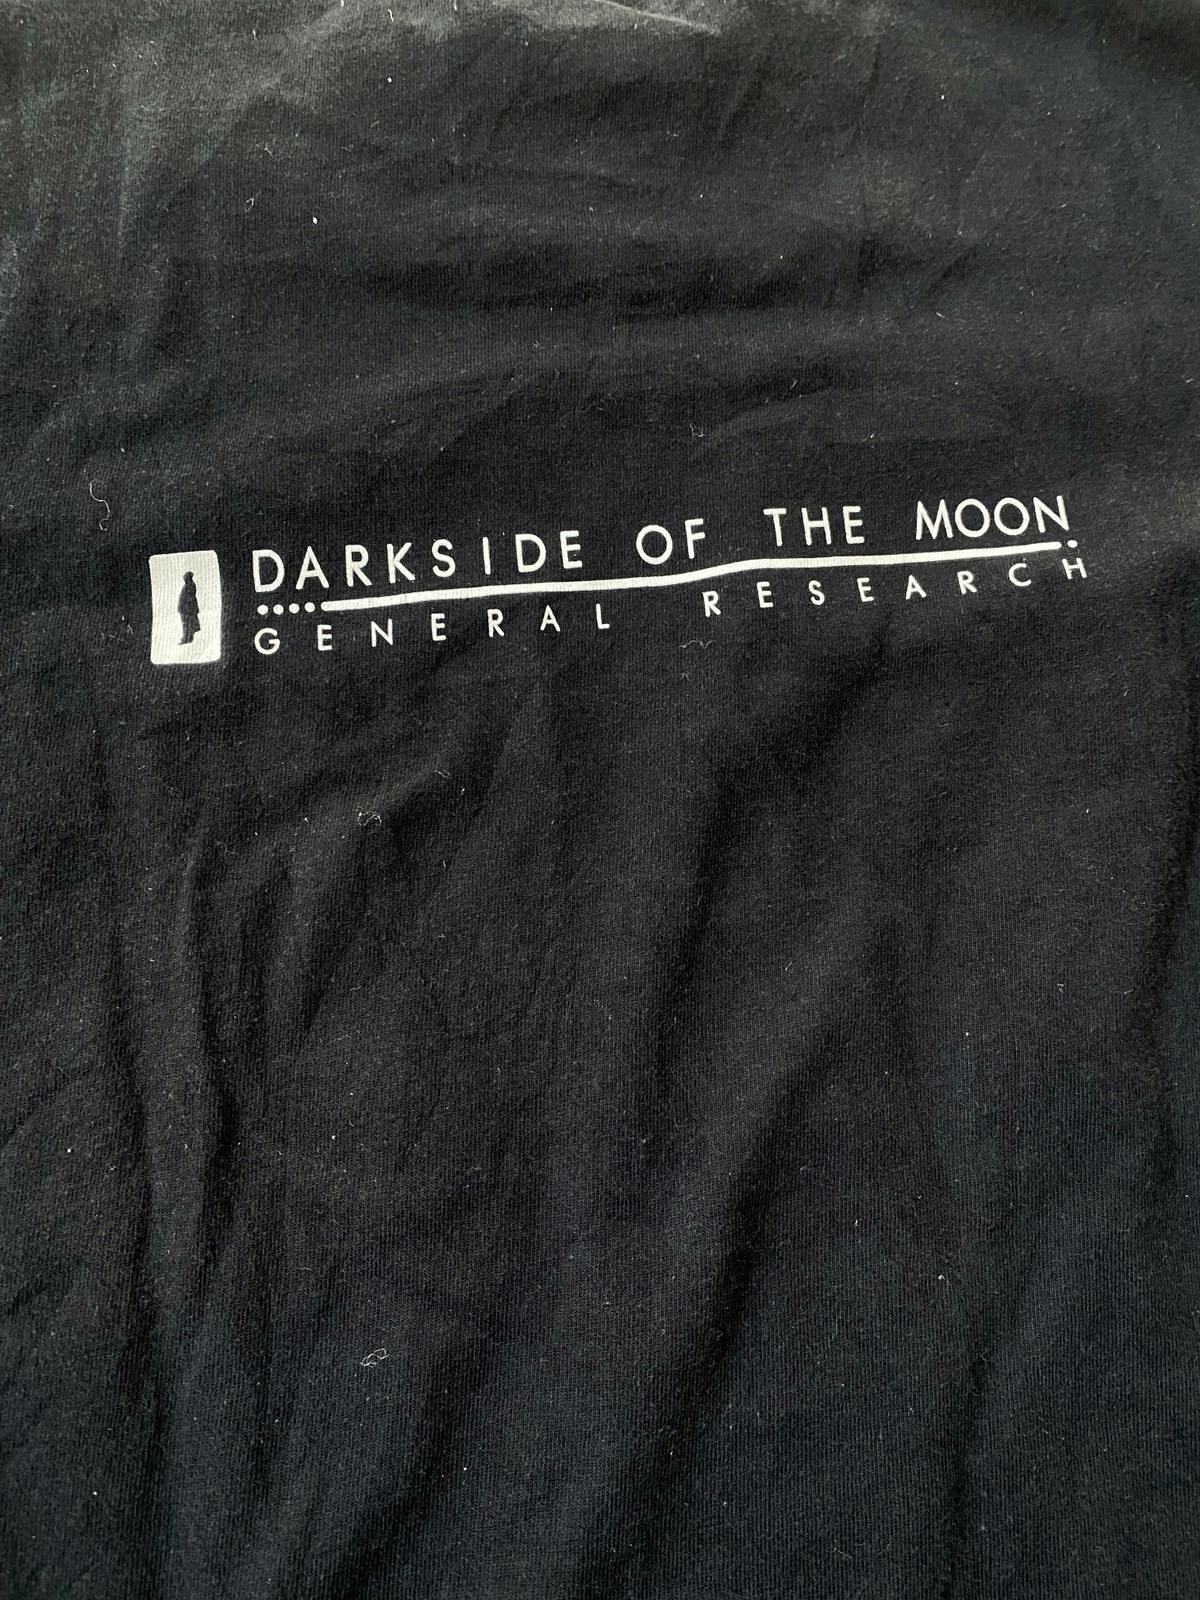 General Research "Dark Side Of The Moon" - 9